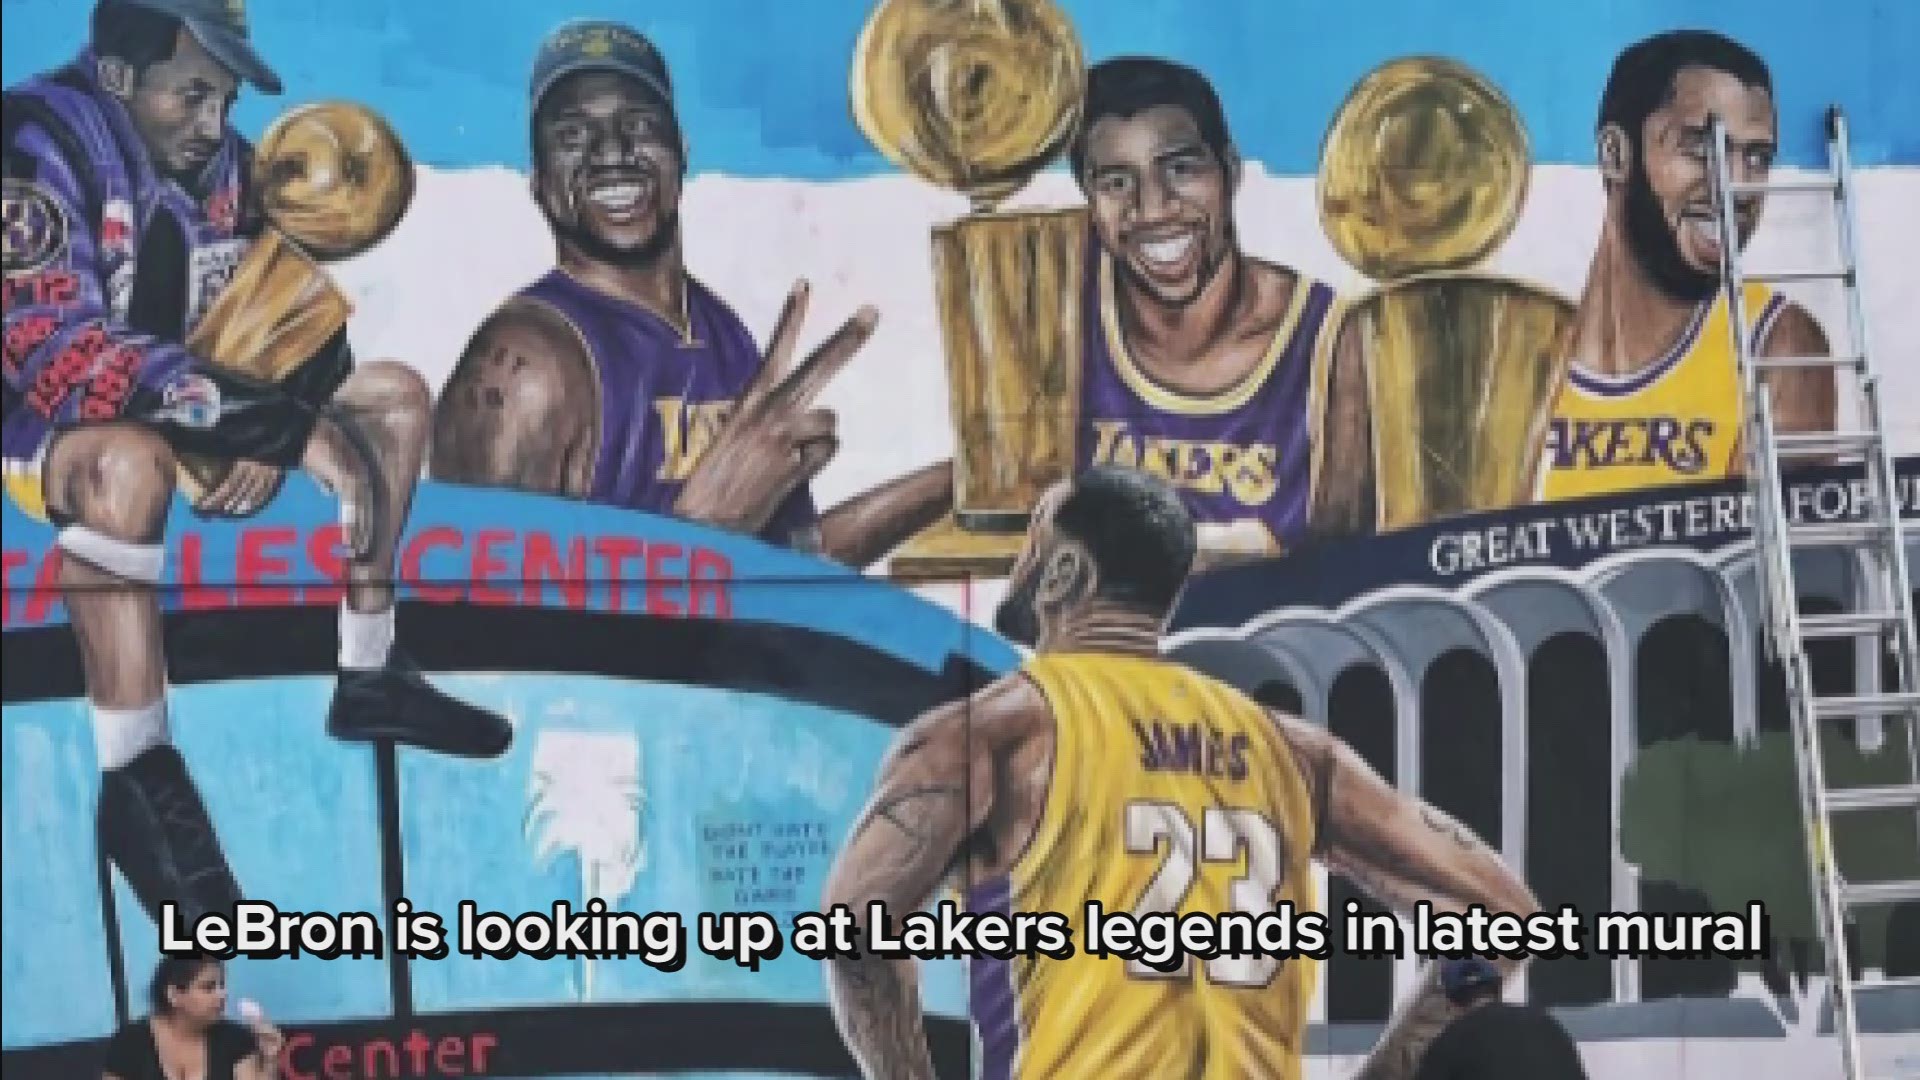 Los Angeles artist erects new LeBron James mural